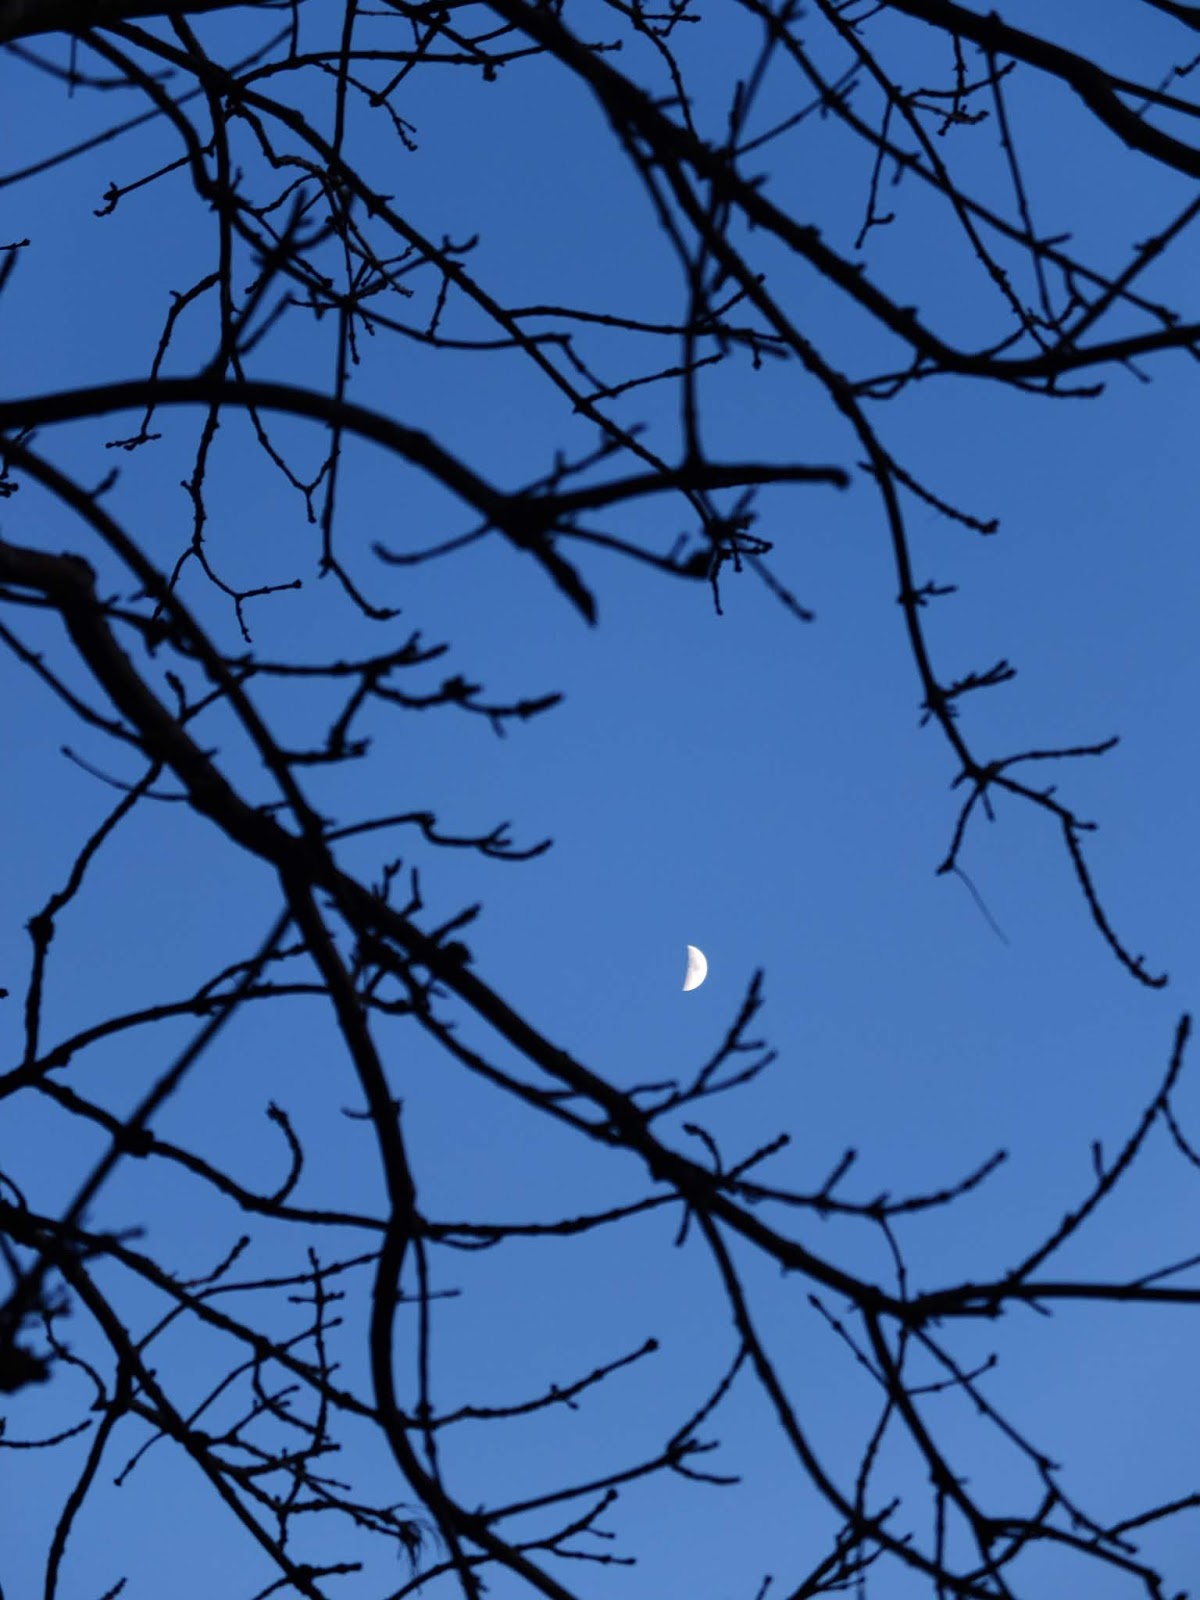 Bright almost half moon shining in the sky between bare tree branches.